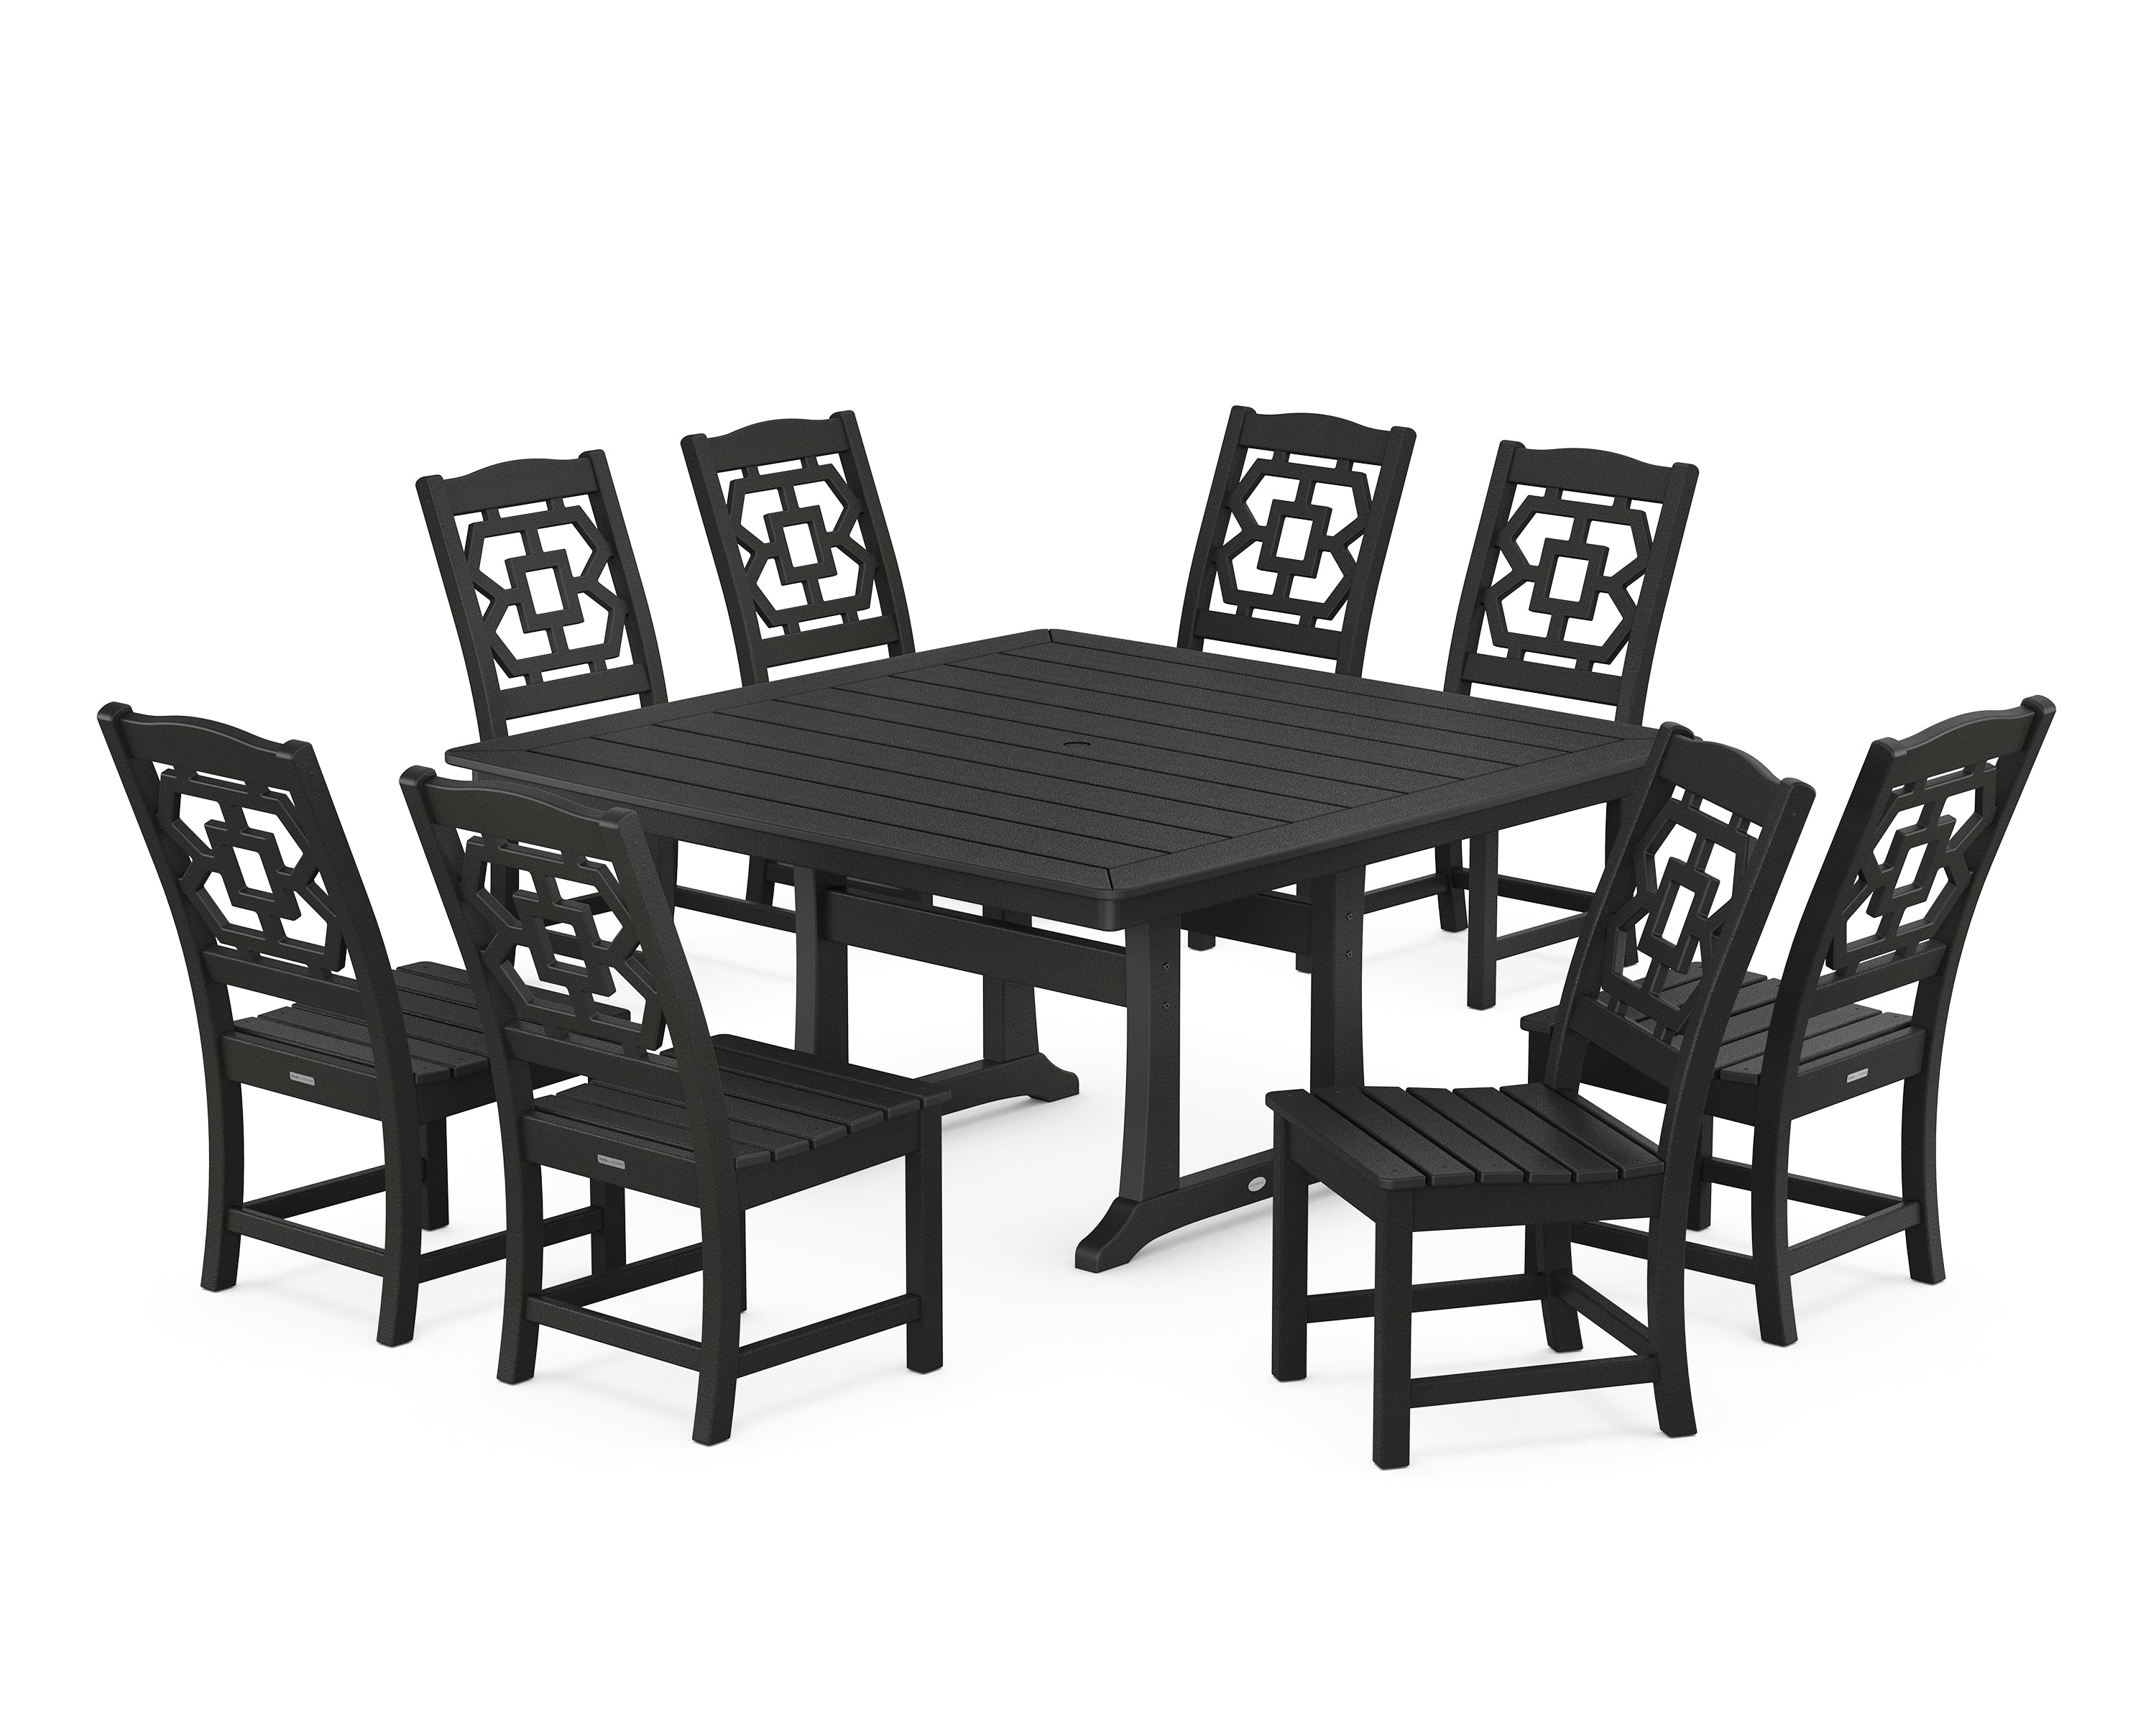 Martha Stewart by POLYWOOD® Chinoiserie 9-Piece Square Side Chair Dining Set with Trestle Legs in Black